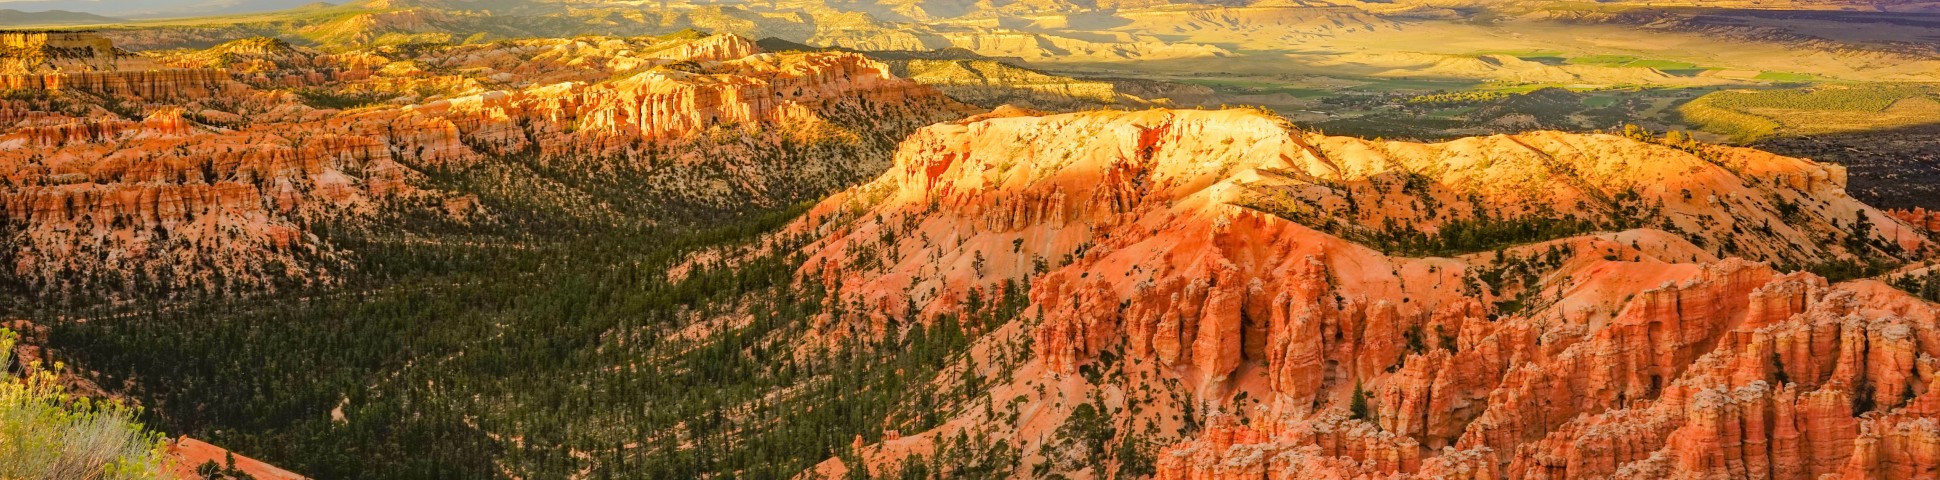 Colorful rock formations in Bryce Canyon National Park